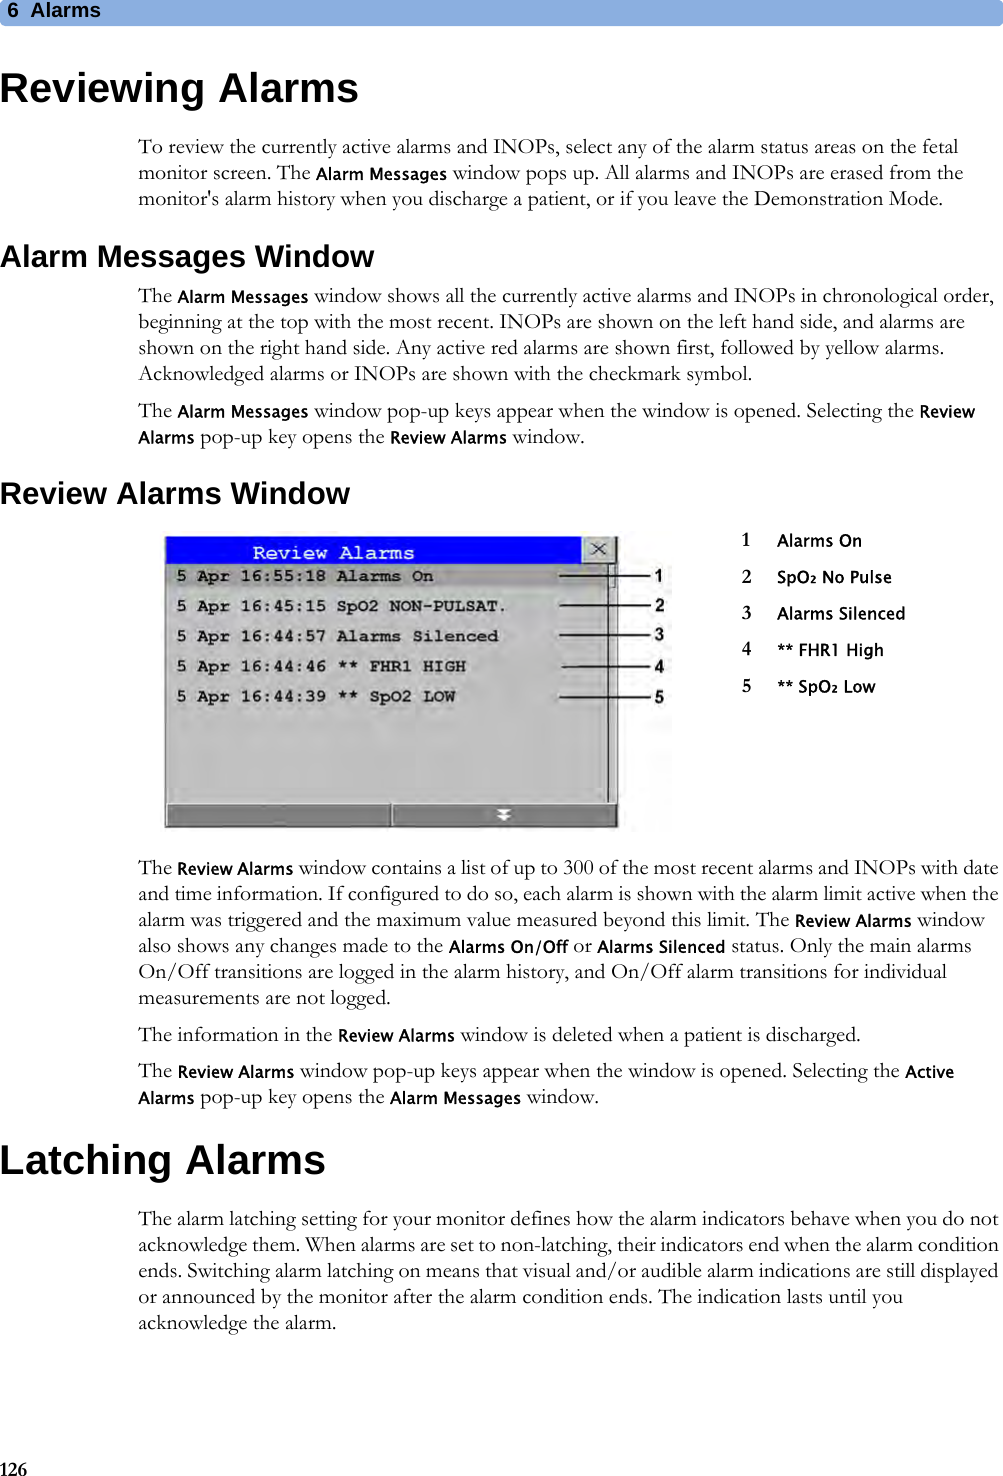 6  Alarms126Reviewing AlarmsTo review the currently active alarms and INOPs, select any of the alarm status areas on the fetal monitor screen. The Alarm Messages window pops up. All alarms and INOPs are erased from the monitor&apos;s alarm history when you discharge a patient, or if you leave the Demonstration Mode.Alarm Messages WindowThe Alarm Messages window shows all the currently active alarms and INOPs in chronological order, beginning at the top with the most recent. INOPs are shown on the left hand side, and alarms are shown on the right hand side. Any active red alarms are shown first, followed by yellow alarms. Acknowledged alarms or INOPs are shown with the checkmark symbol.The Alarm Messages window pop-up keys appear when the window is opened. Selecting the Review Alarms pop-up key opens the Review Alarms window.Review Alarms WindowThe Review Alarms window contains a list of up to 300 of the most recent alarms and INOPs with date and time information. If configured to do so, each alarm is shown with the alarm limit active when the alarm was triggered and the maximum value measured beyond this limit. The Review Alarms window also shows any changes made to the Alarms On/Off or Alarms Silenced status. Only the main alarms On/Off transitions are logged in the alarm history, and On/Off alarm transitions for individual measurements are not logged.The information in the Review Alarms window is deleted when a patient is discharged.The Review Alarms window pop-up keys appear when the window is opened. Selecting the Active Alarms pop-up key opens the Alarm Messages window.Latching AlarmsThe alarm latching setting for your monitor defines how the alarm indicators behave when you do not acknowledge them. When alarms are set to non-latching, their indicators end when the alarm condition ends. Switching alarm latching on means that visual and/or audible alarm indications are still displayed or announced by the monitor after the alarm condition ends. The indication lasts until you acknowledge the alarm.1Alarms On2SpO₂ No Pulse3Alarms Silenced4** FHR1 High5** SpO₂ Low